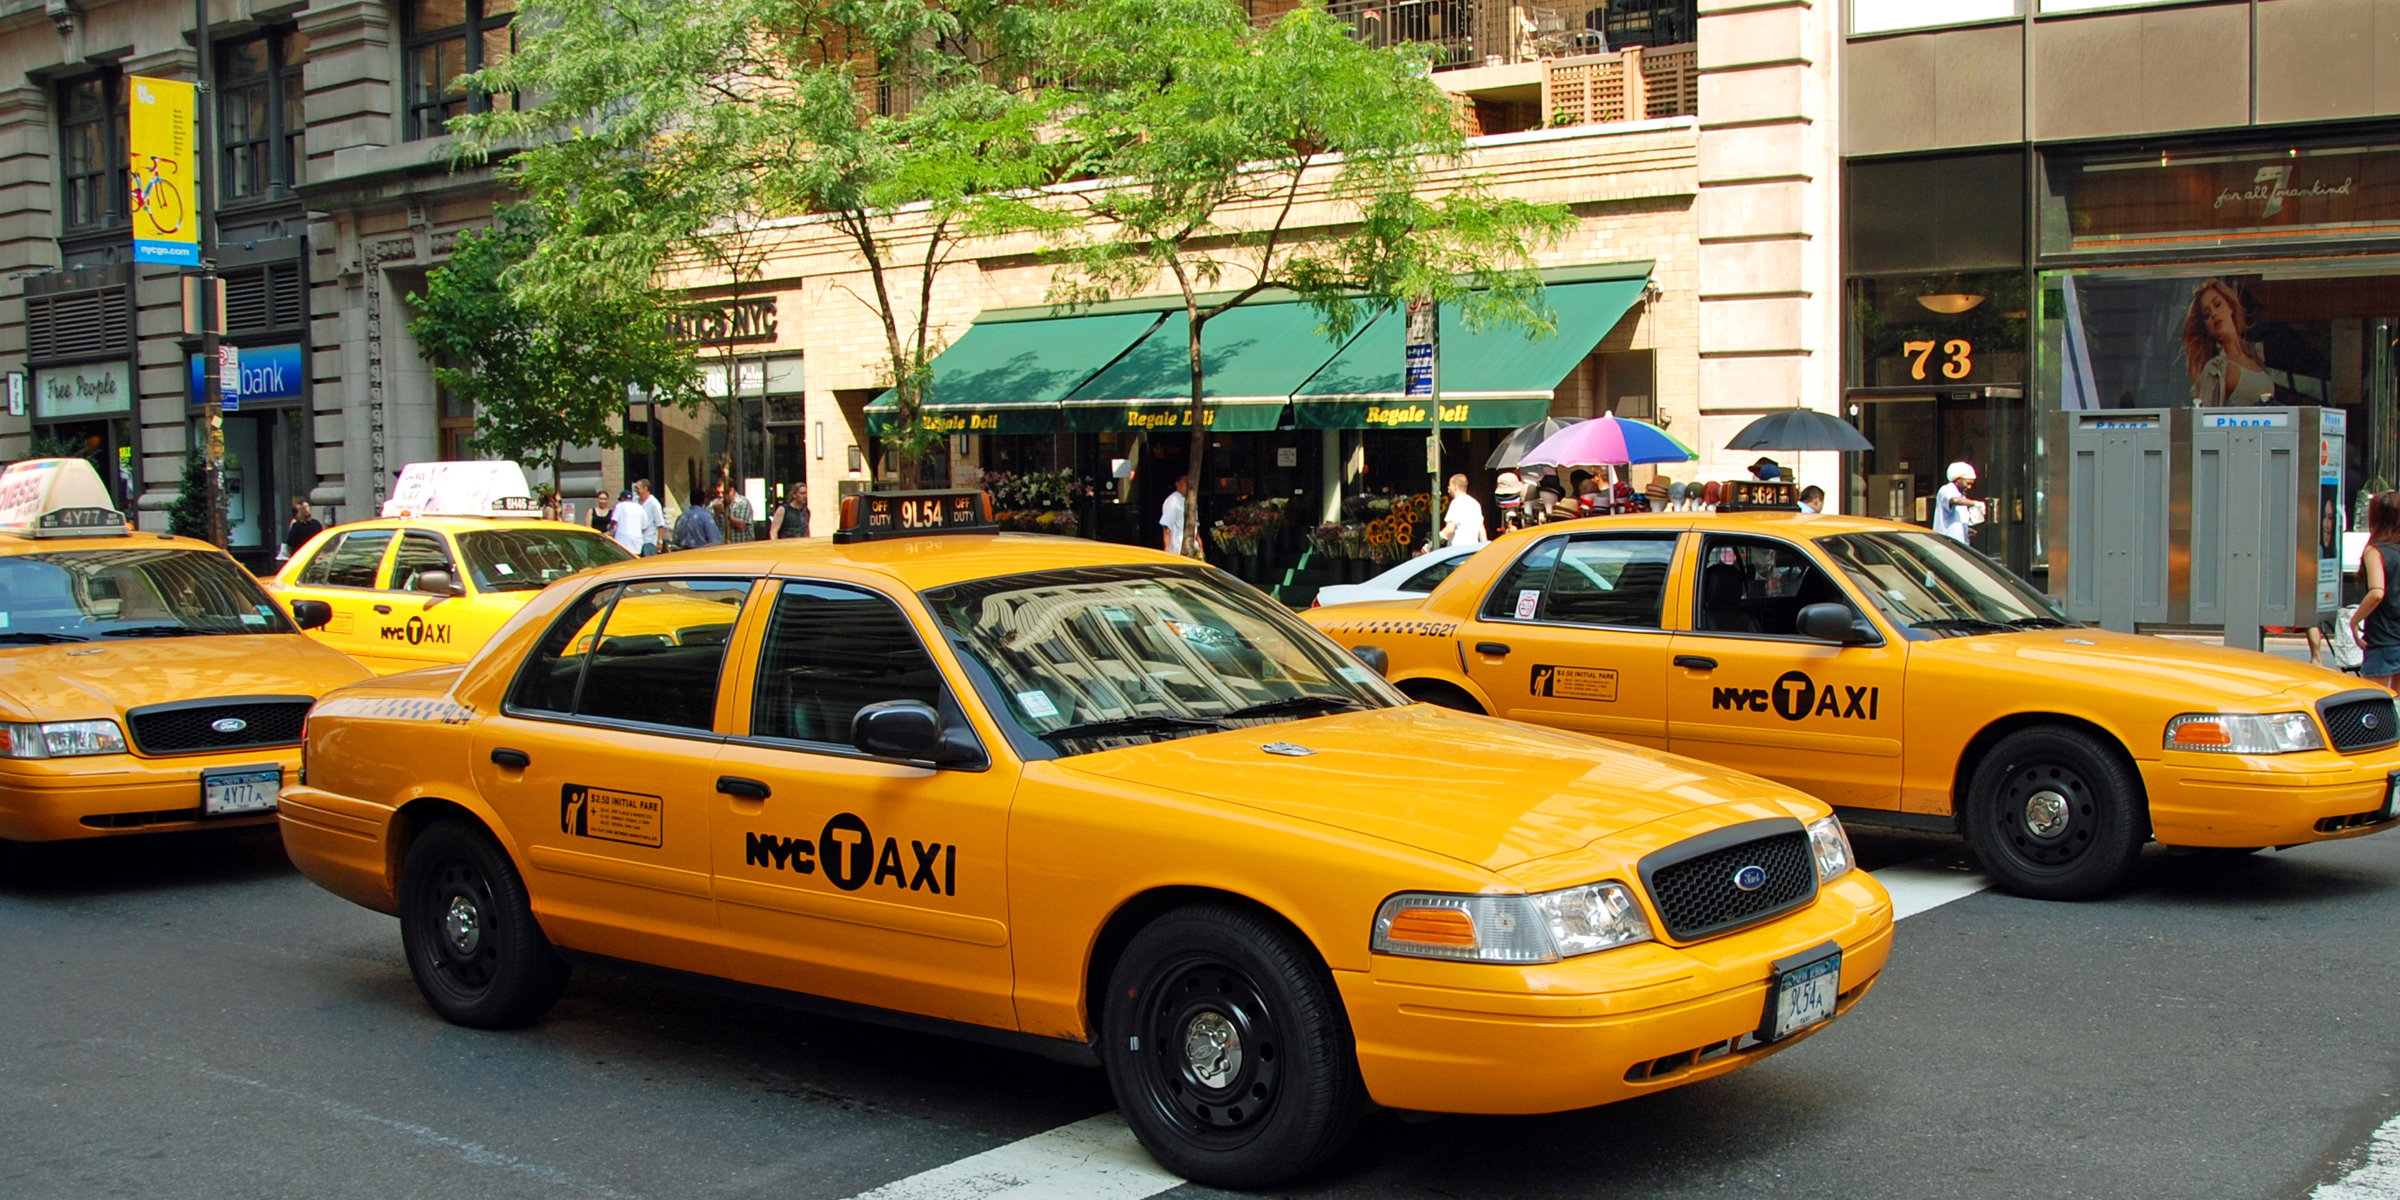 Cabs in a street | Source: Shutterstock